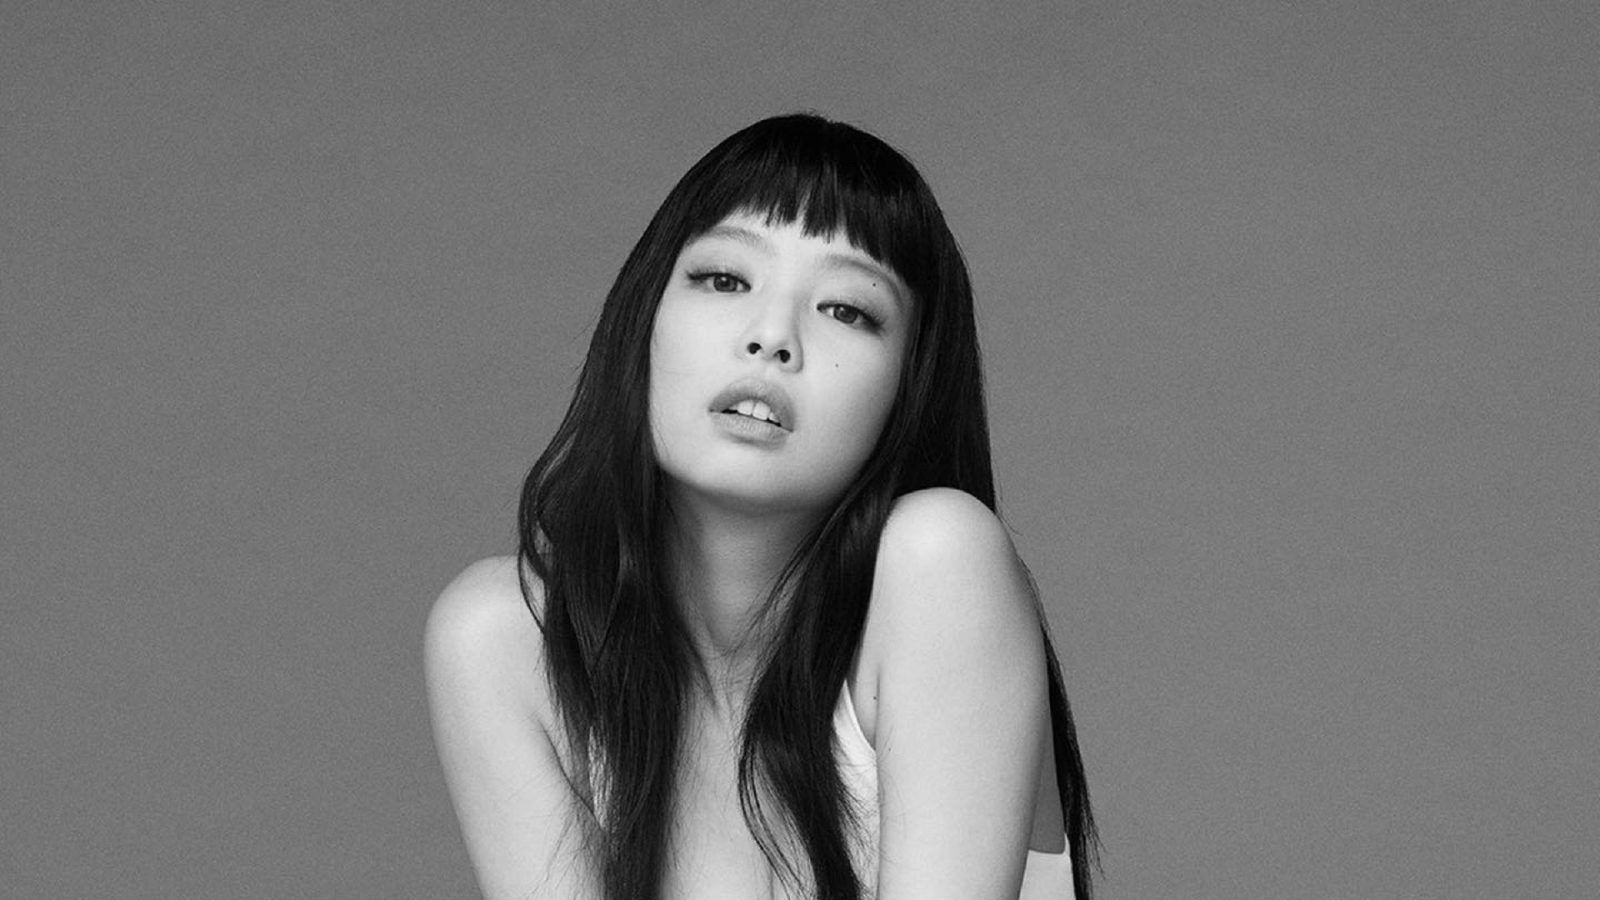 Calvin Klein and Jennie of BLACKPINK are releasing a capsule